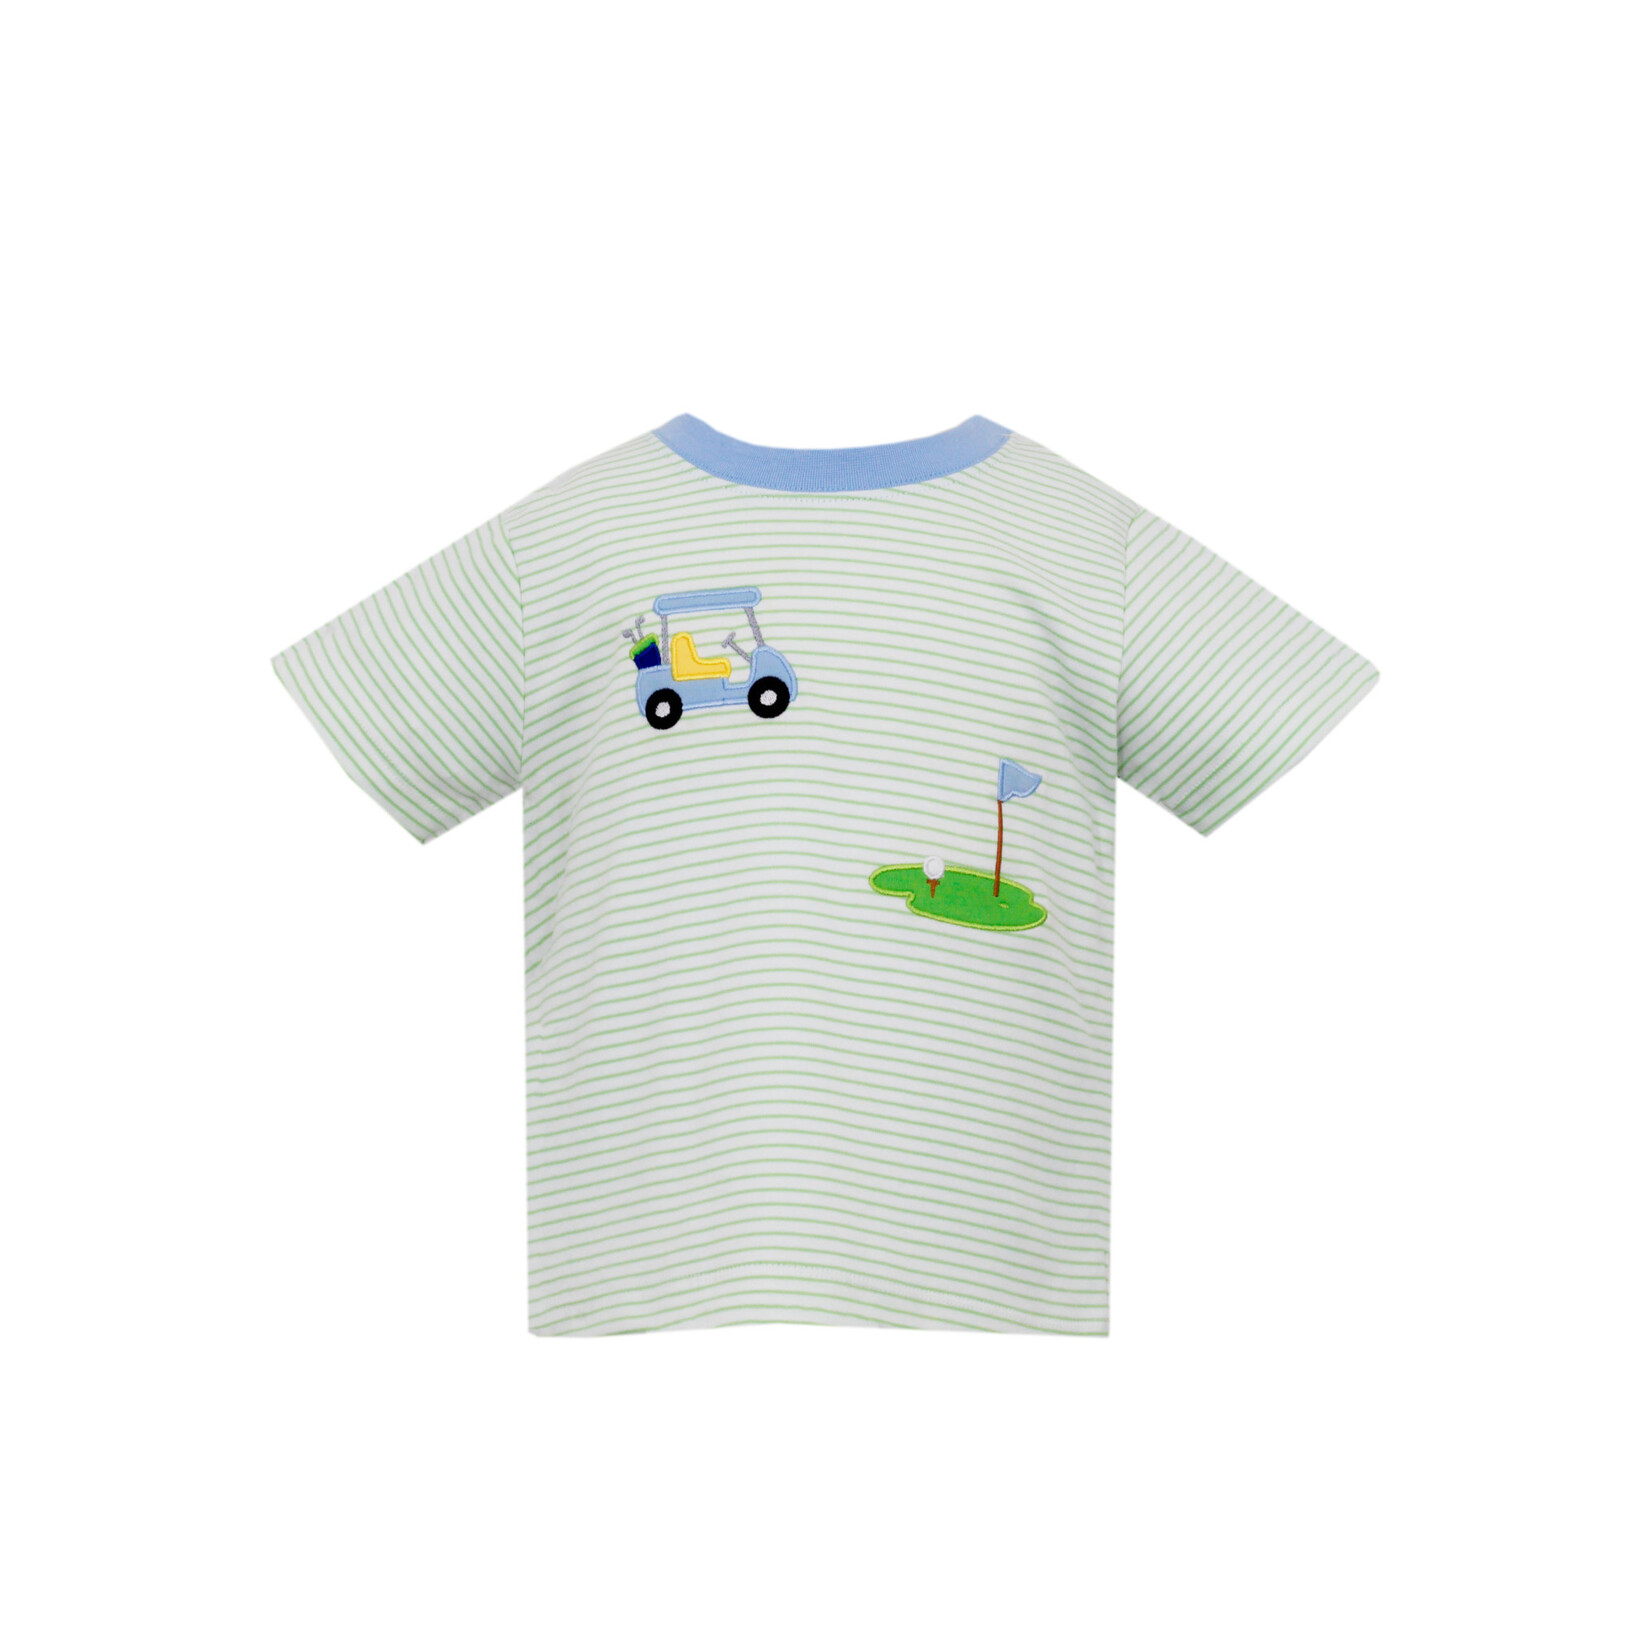 Claire & Charlie Green Stripe Golf Tee